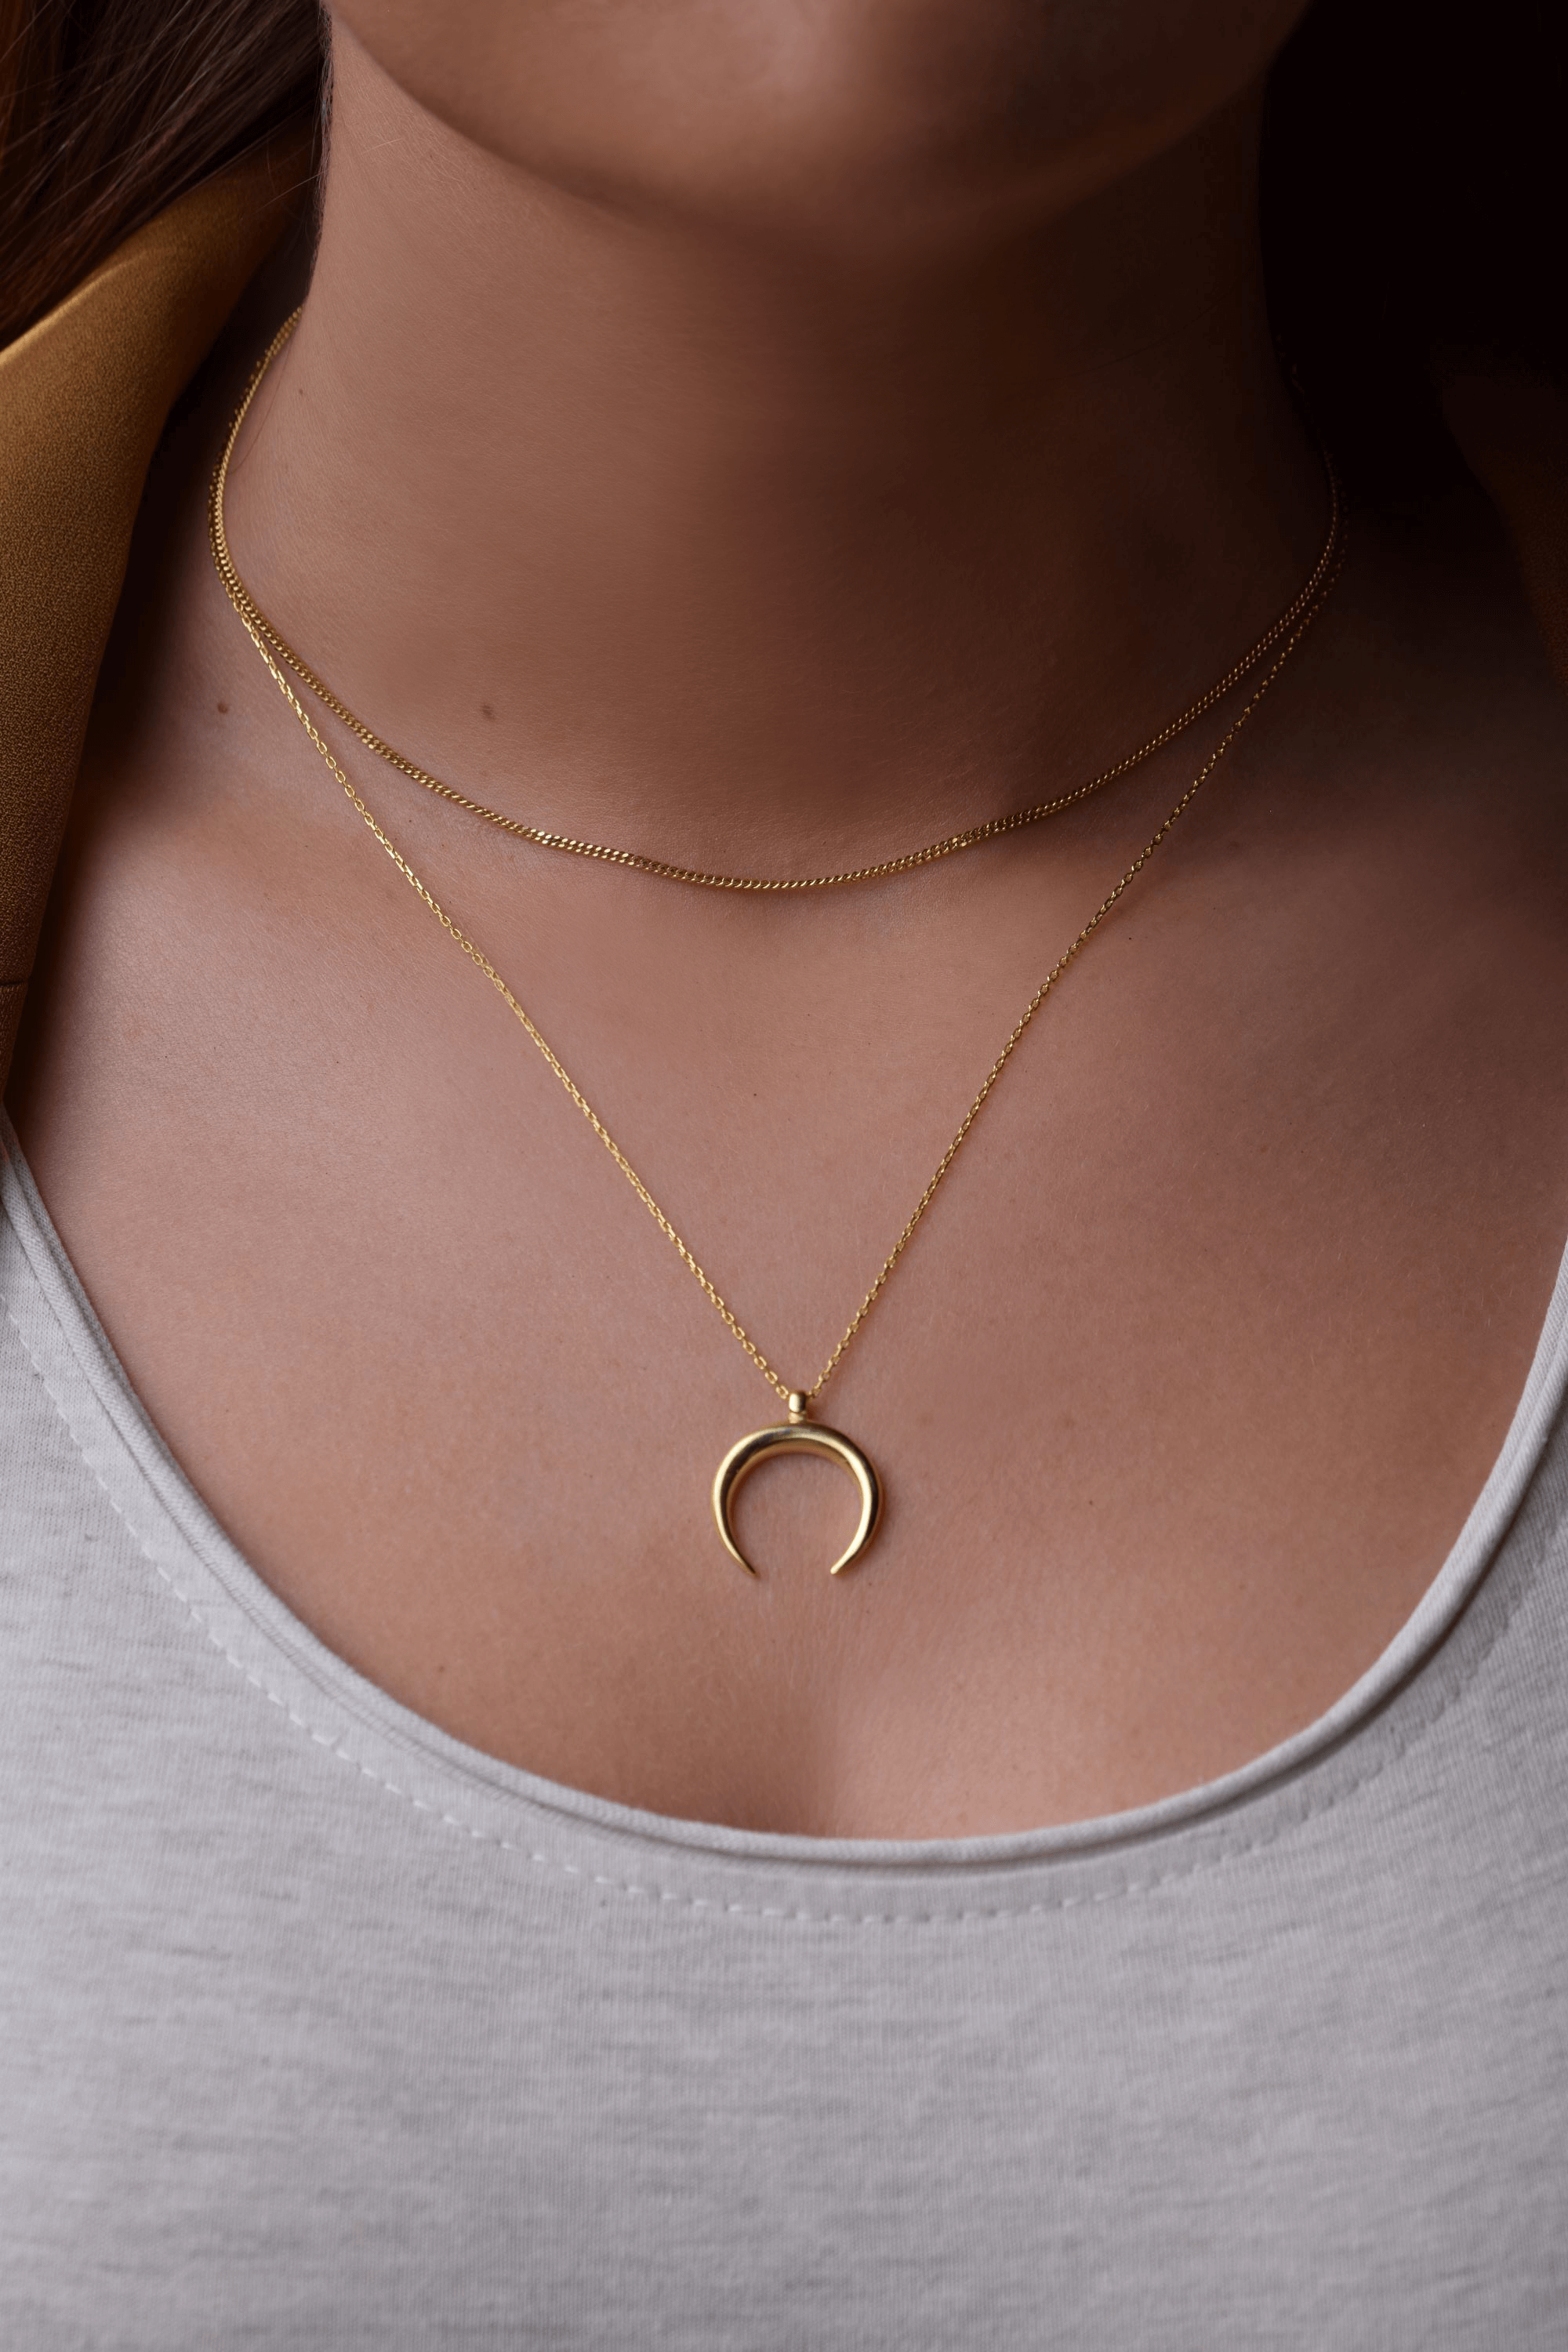 Crescent necklace | 925 silver and gold plated necklace